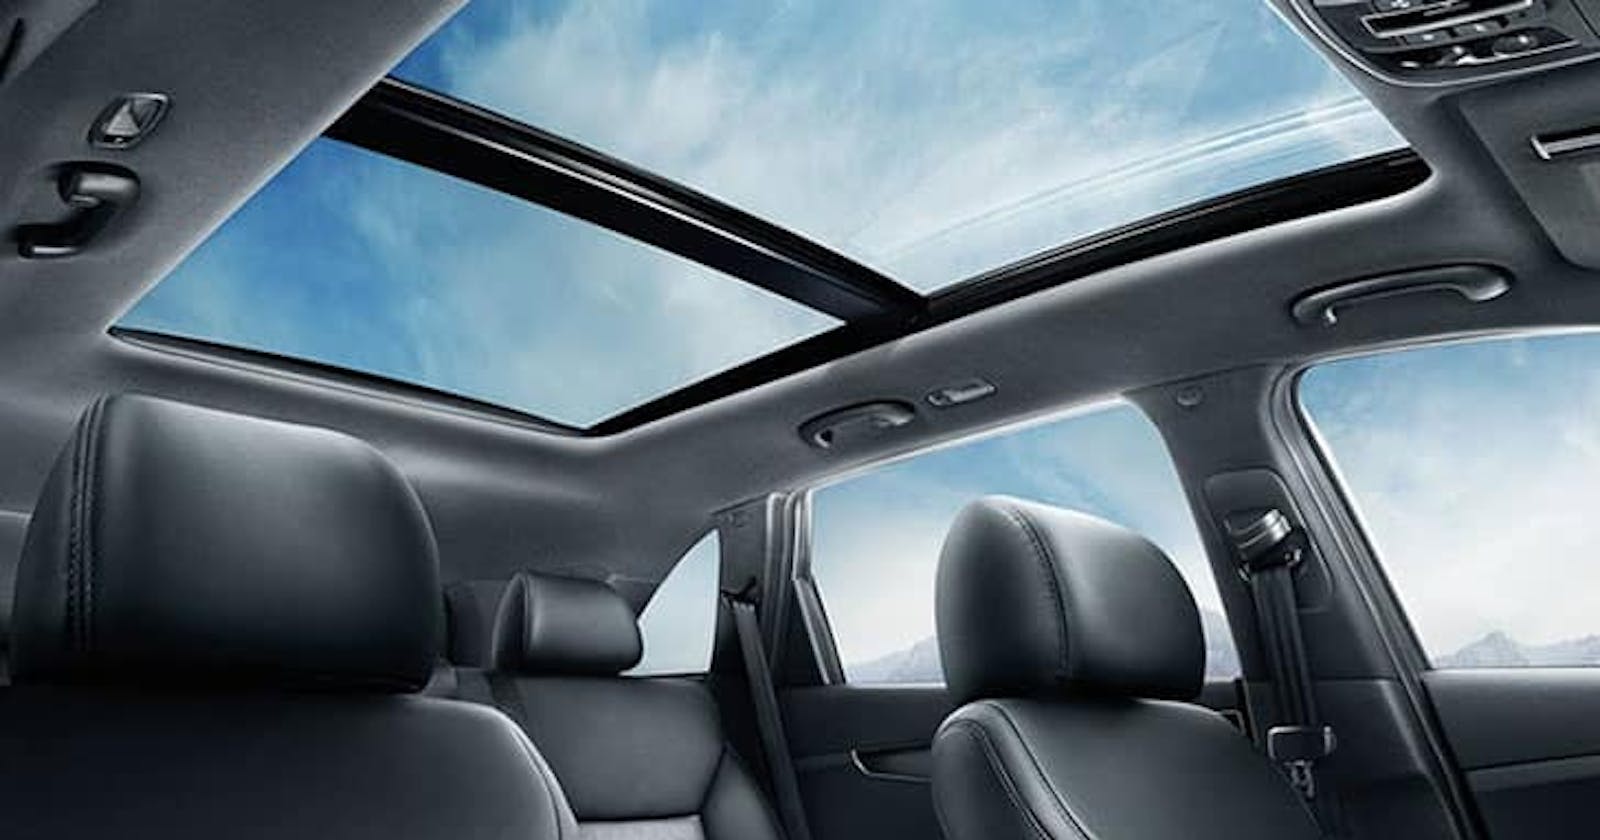 Automotive Sunroof Market Size, Share, Outlook, Demand and Forecast 2027